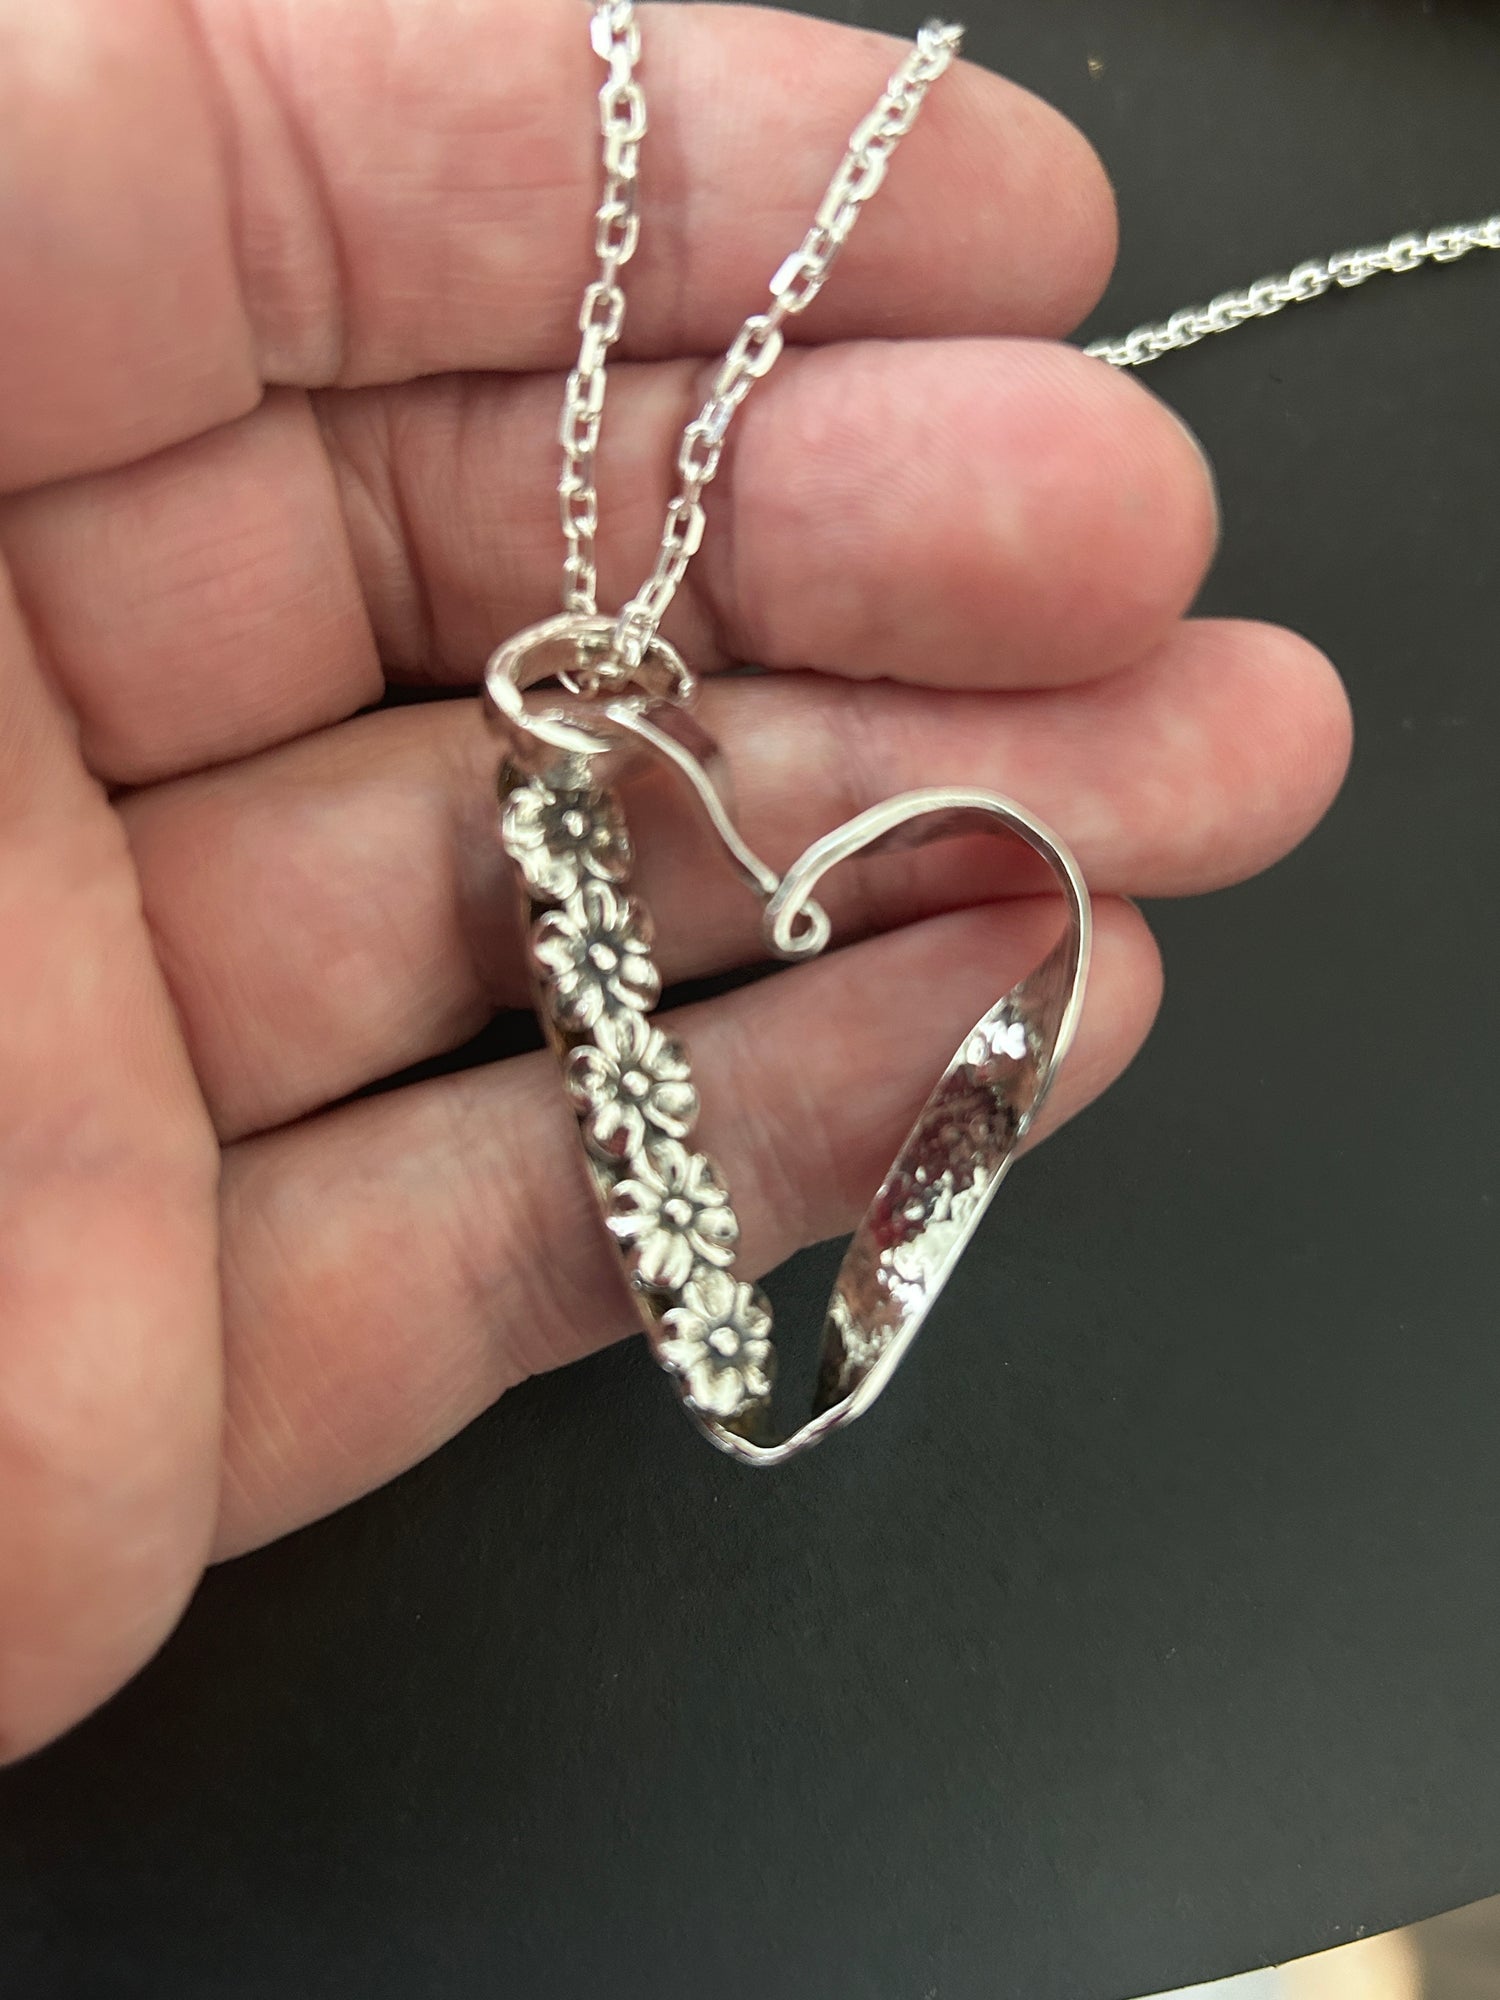 heart and flower necklace in sterling silver